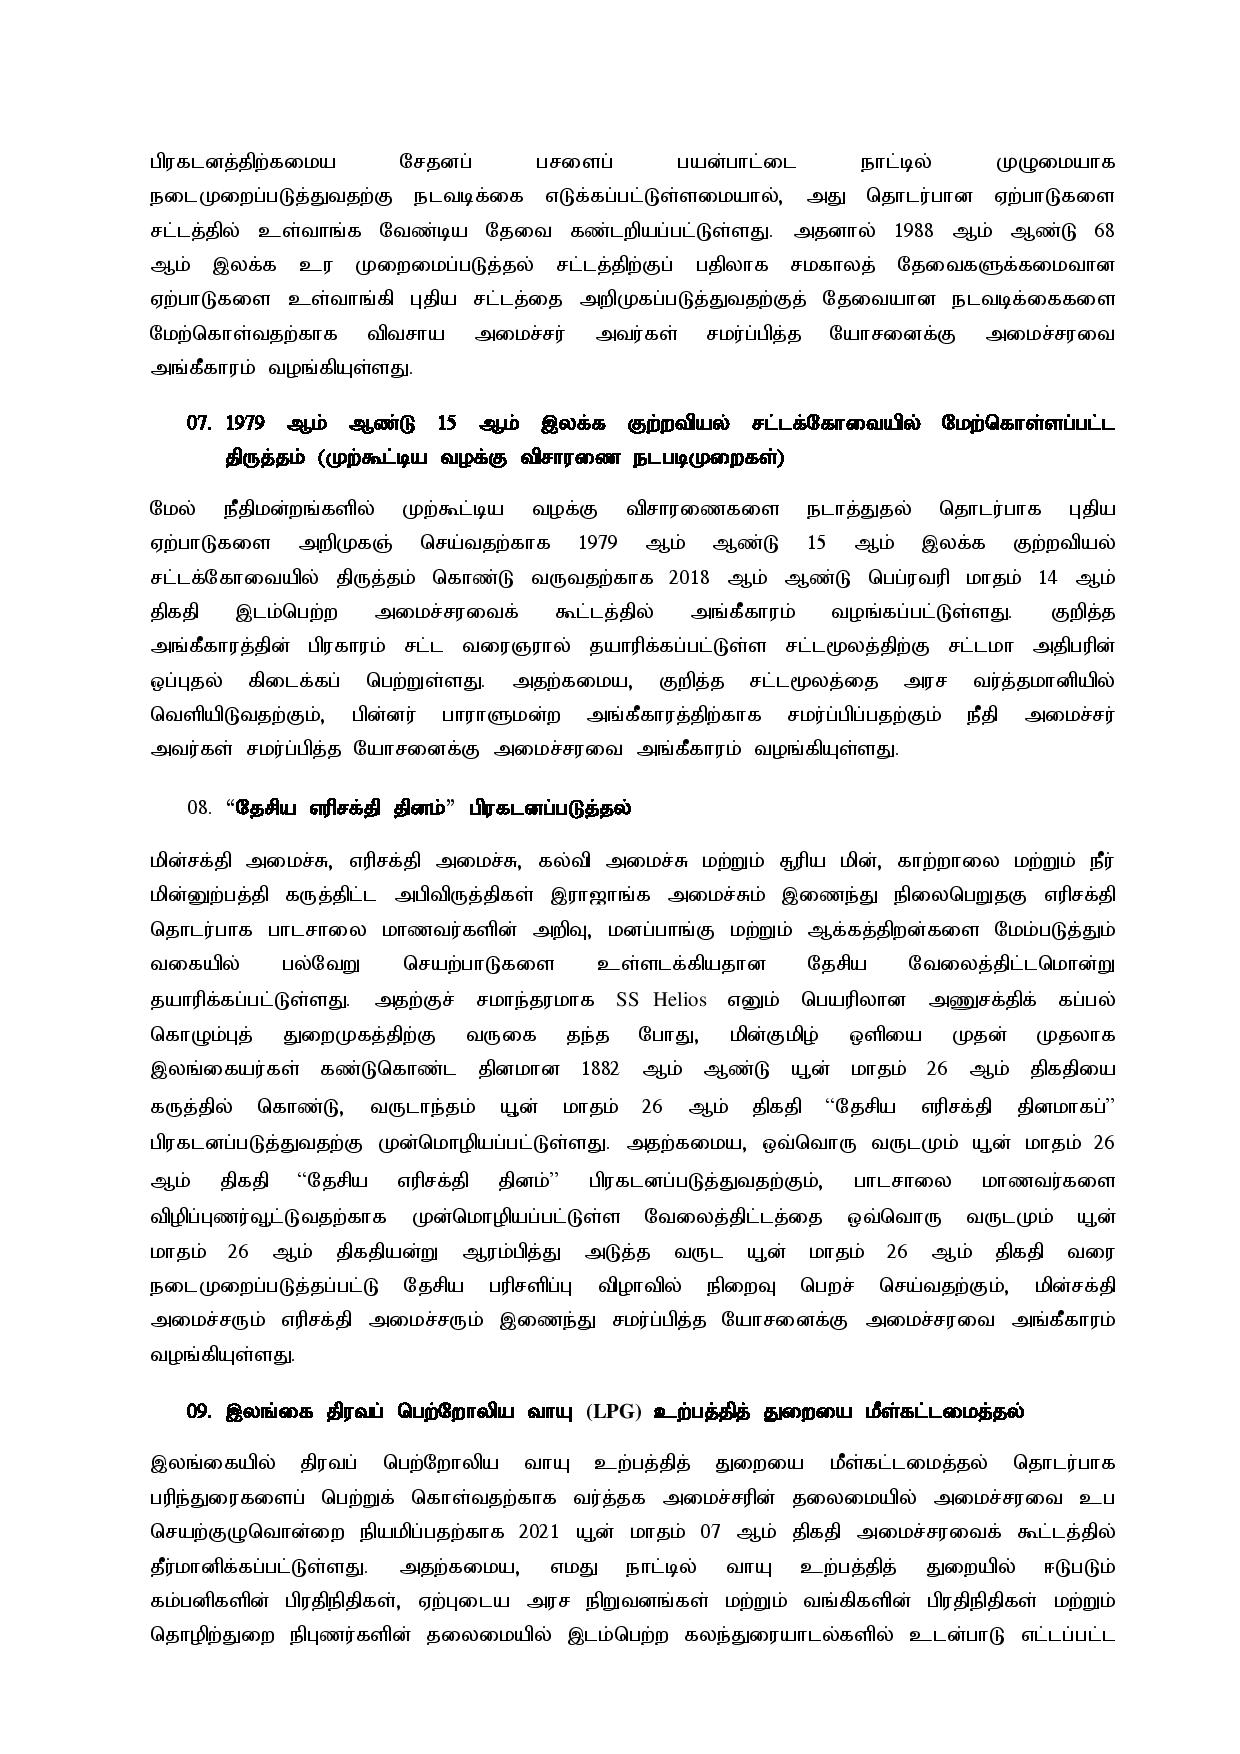 Cabinet Decisions on 21.06.2021 Tamil page 003